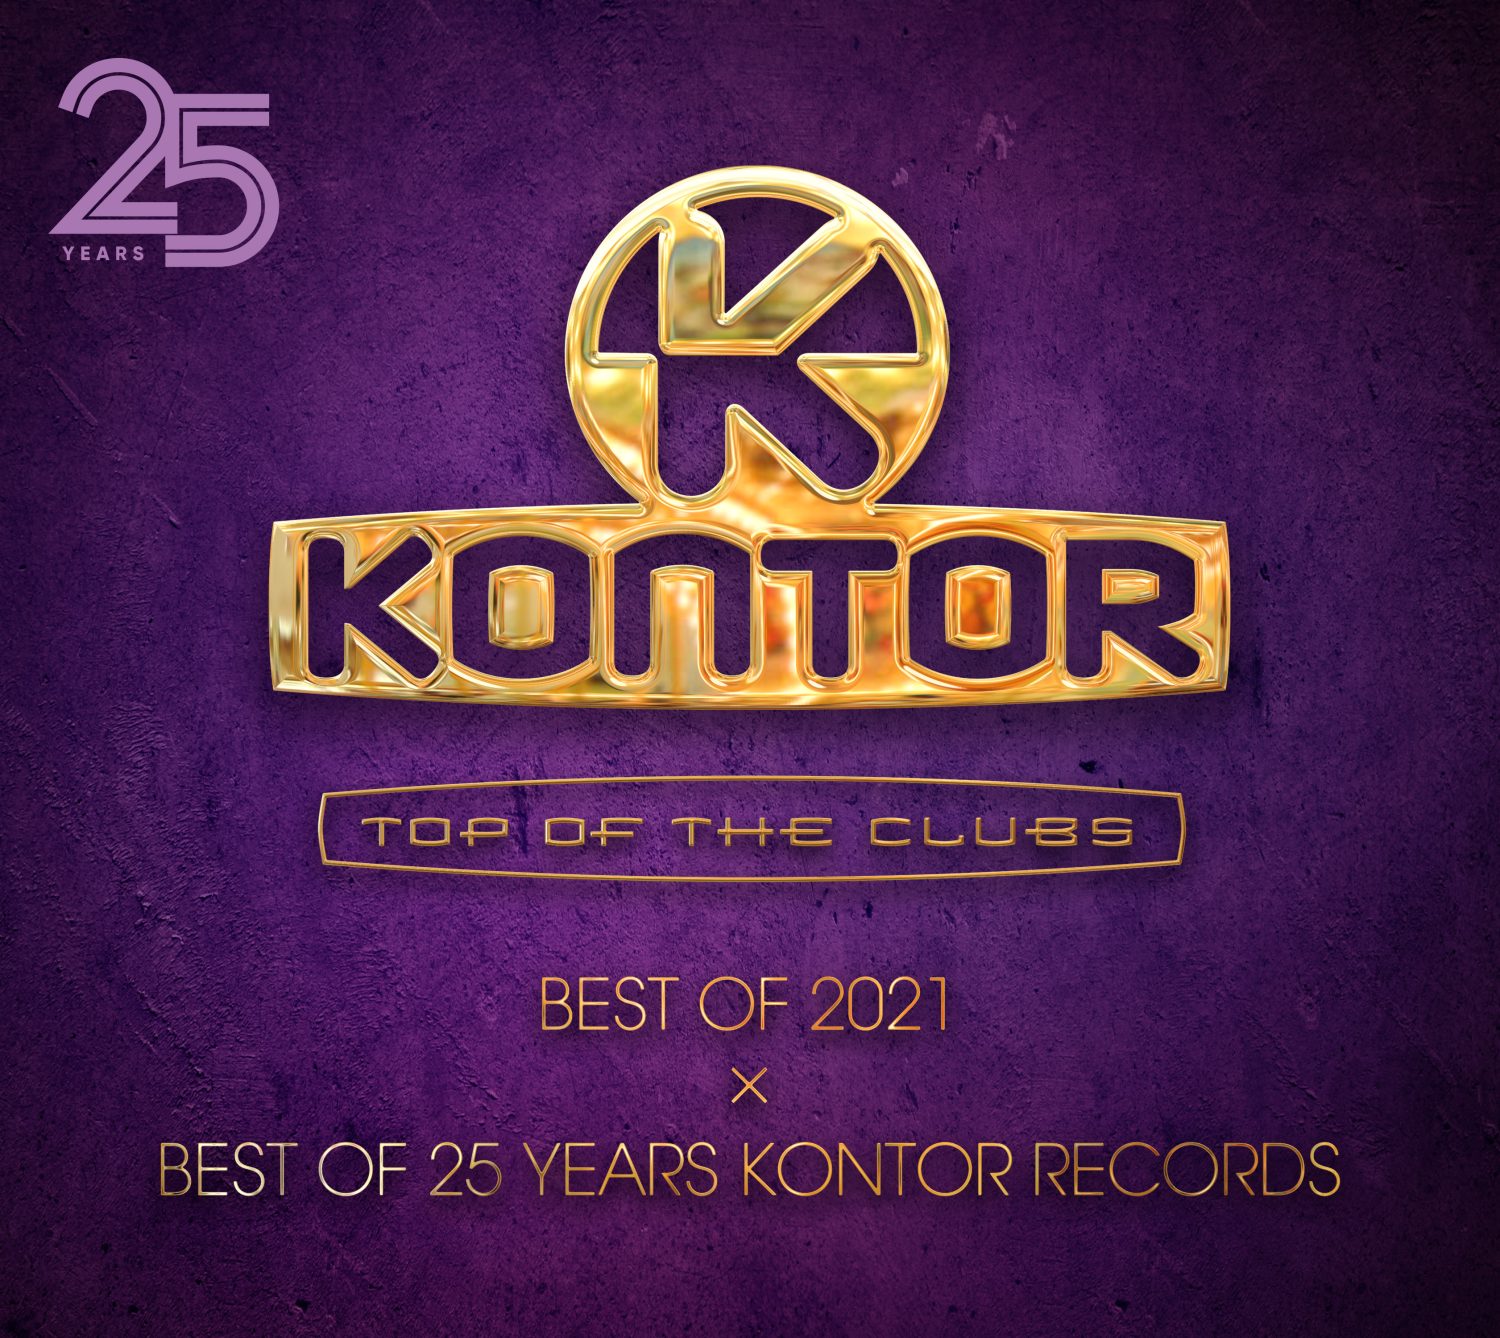 Kontor Top Of The Clubs "Best Of 2021 x Best Of 25 Years Kontor Records"